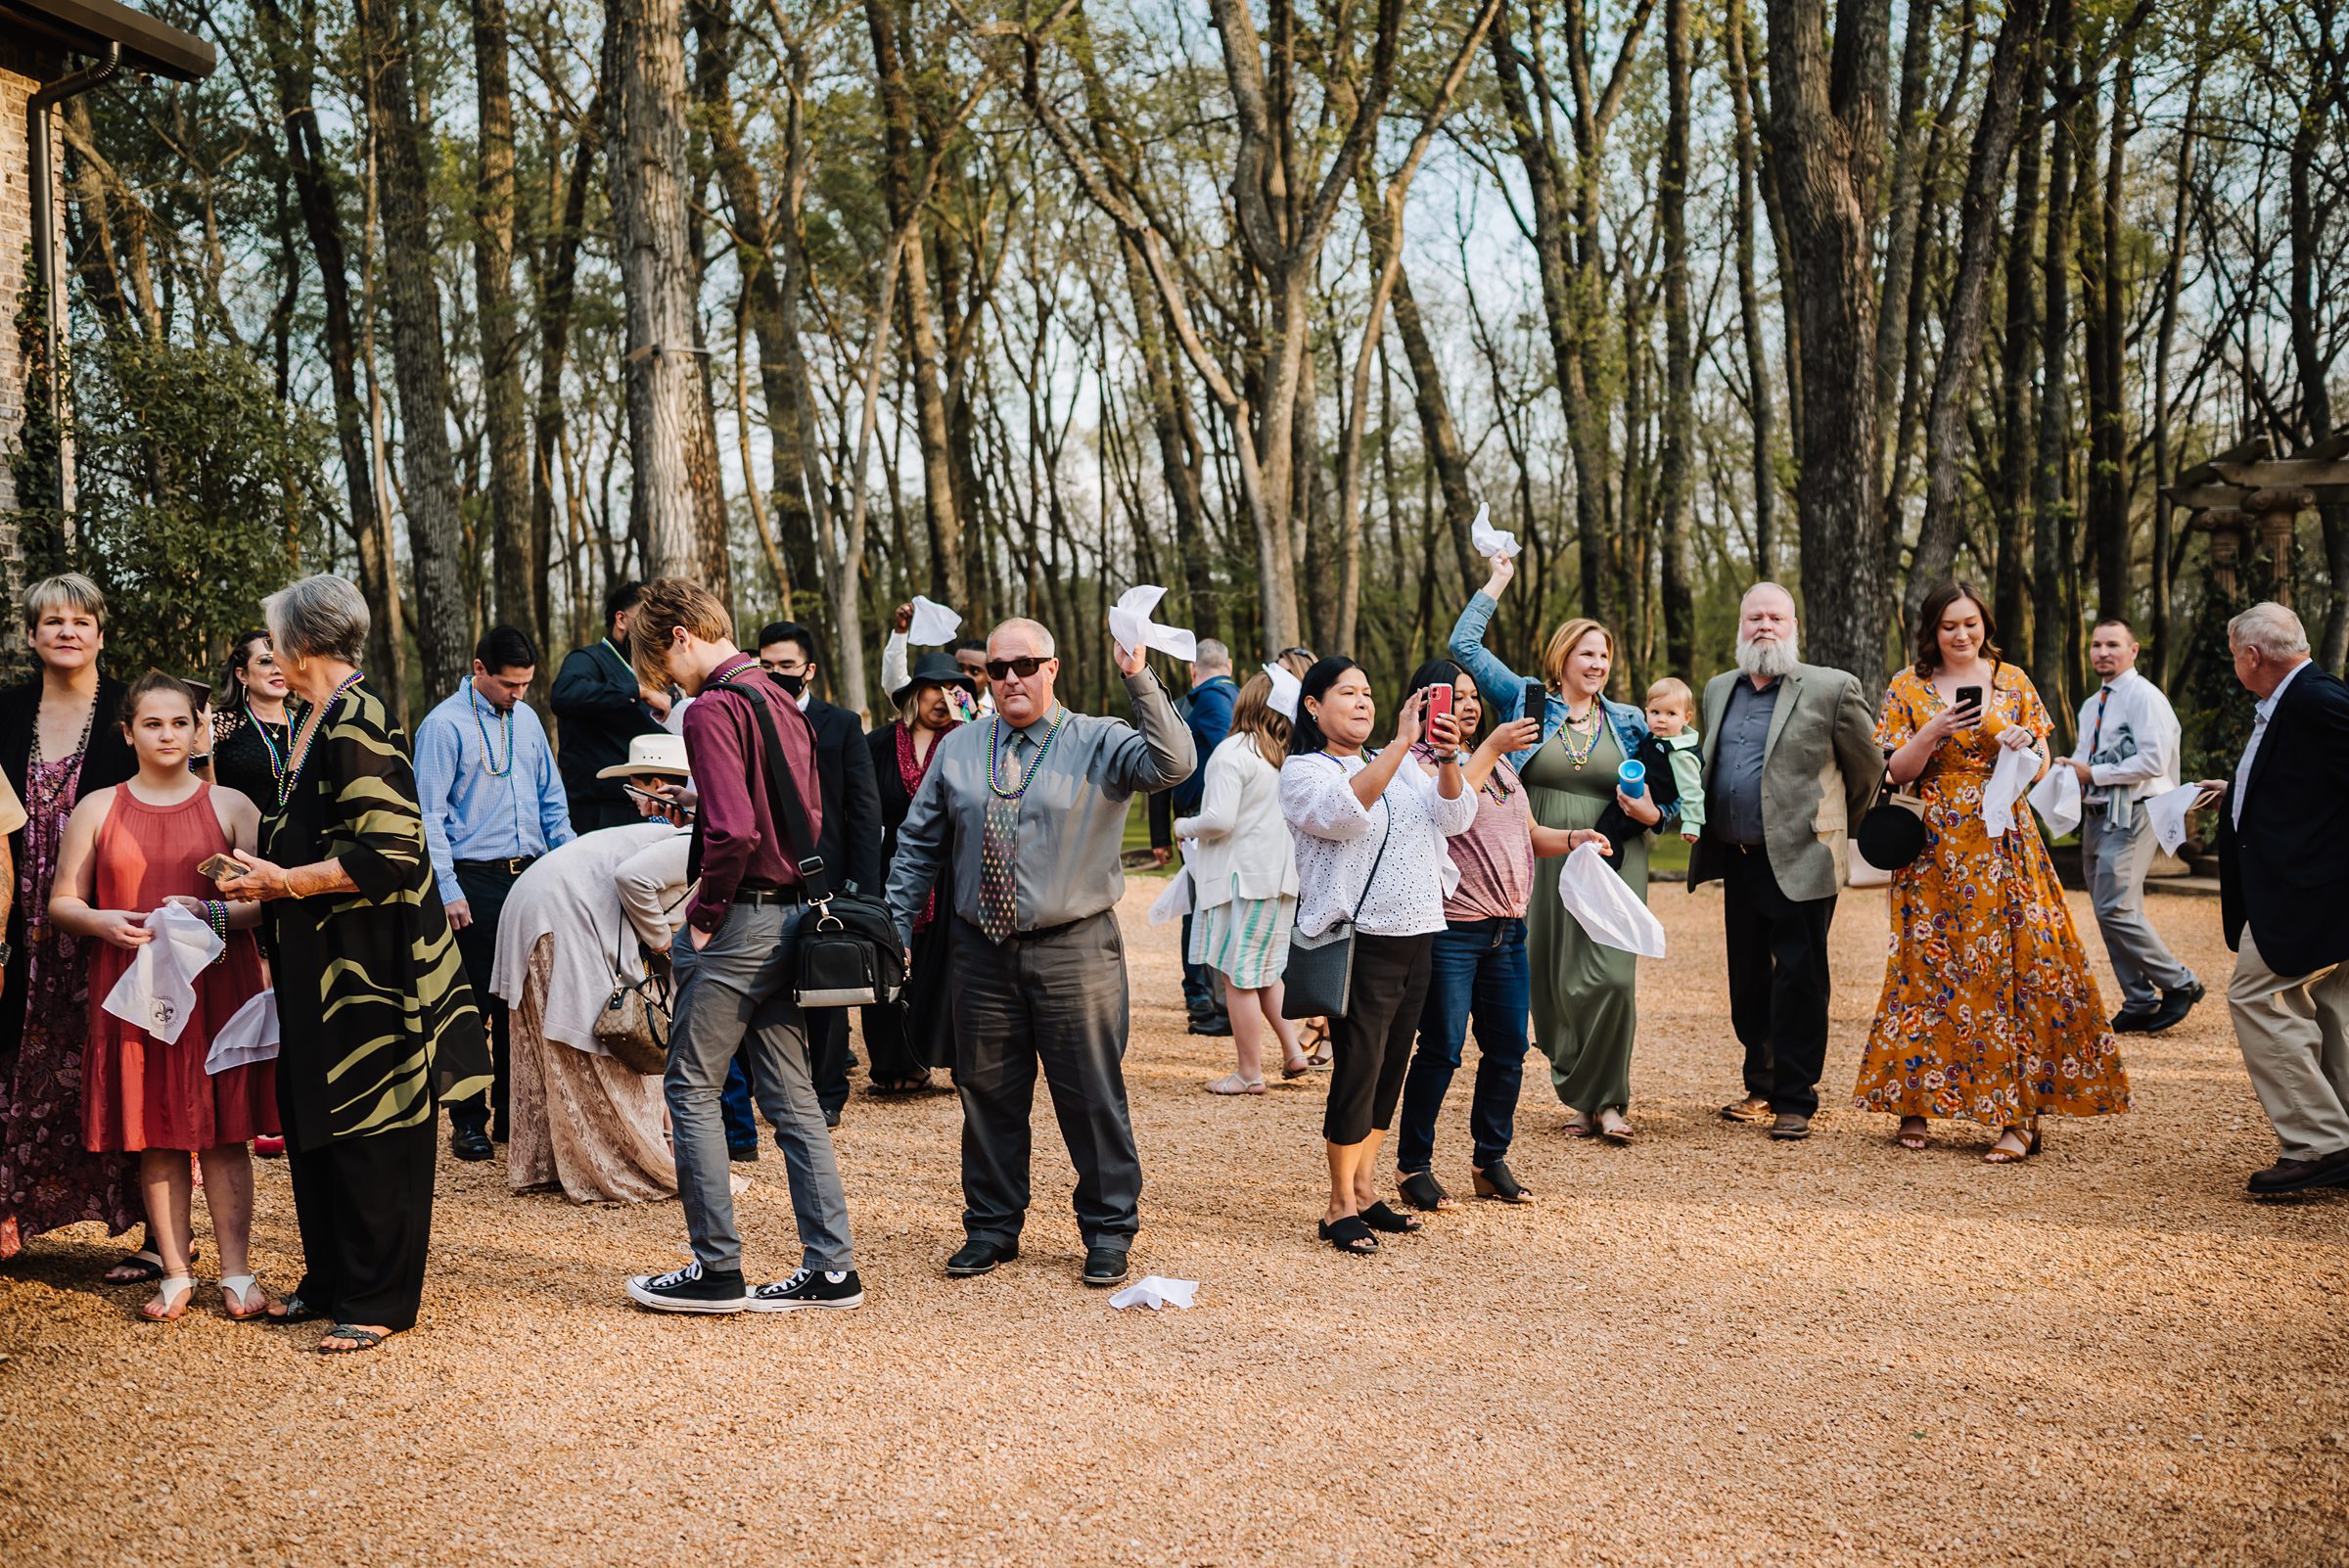 guests participating in second line at Nola themed wedding